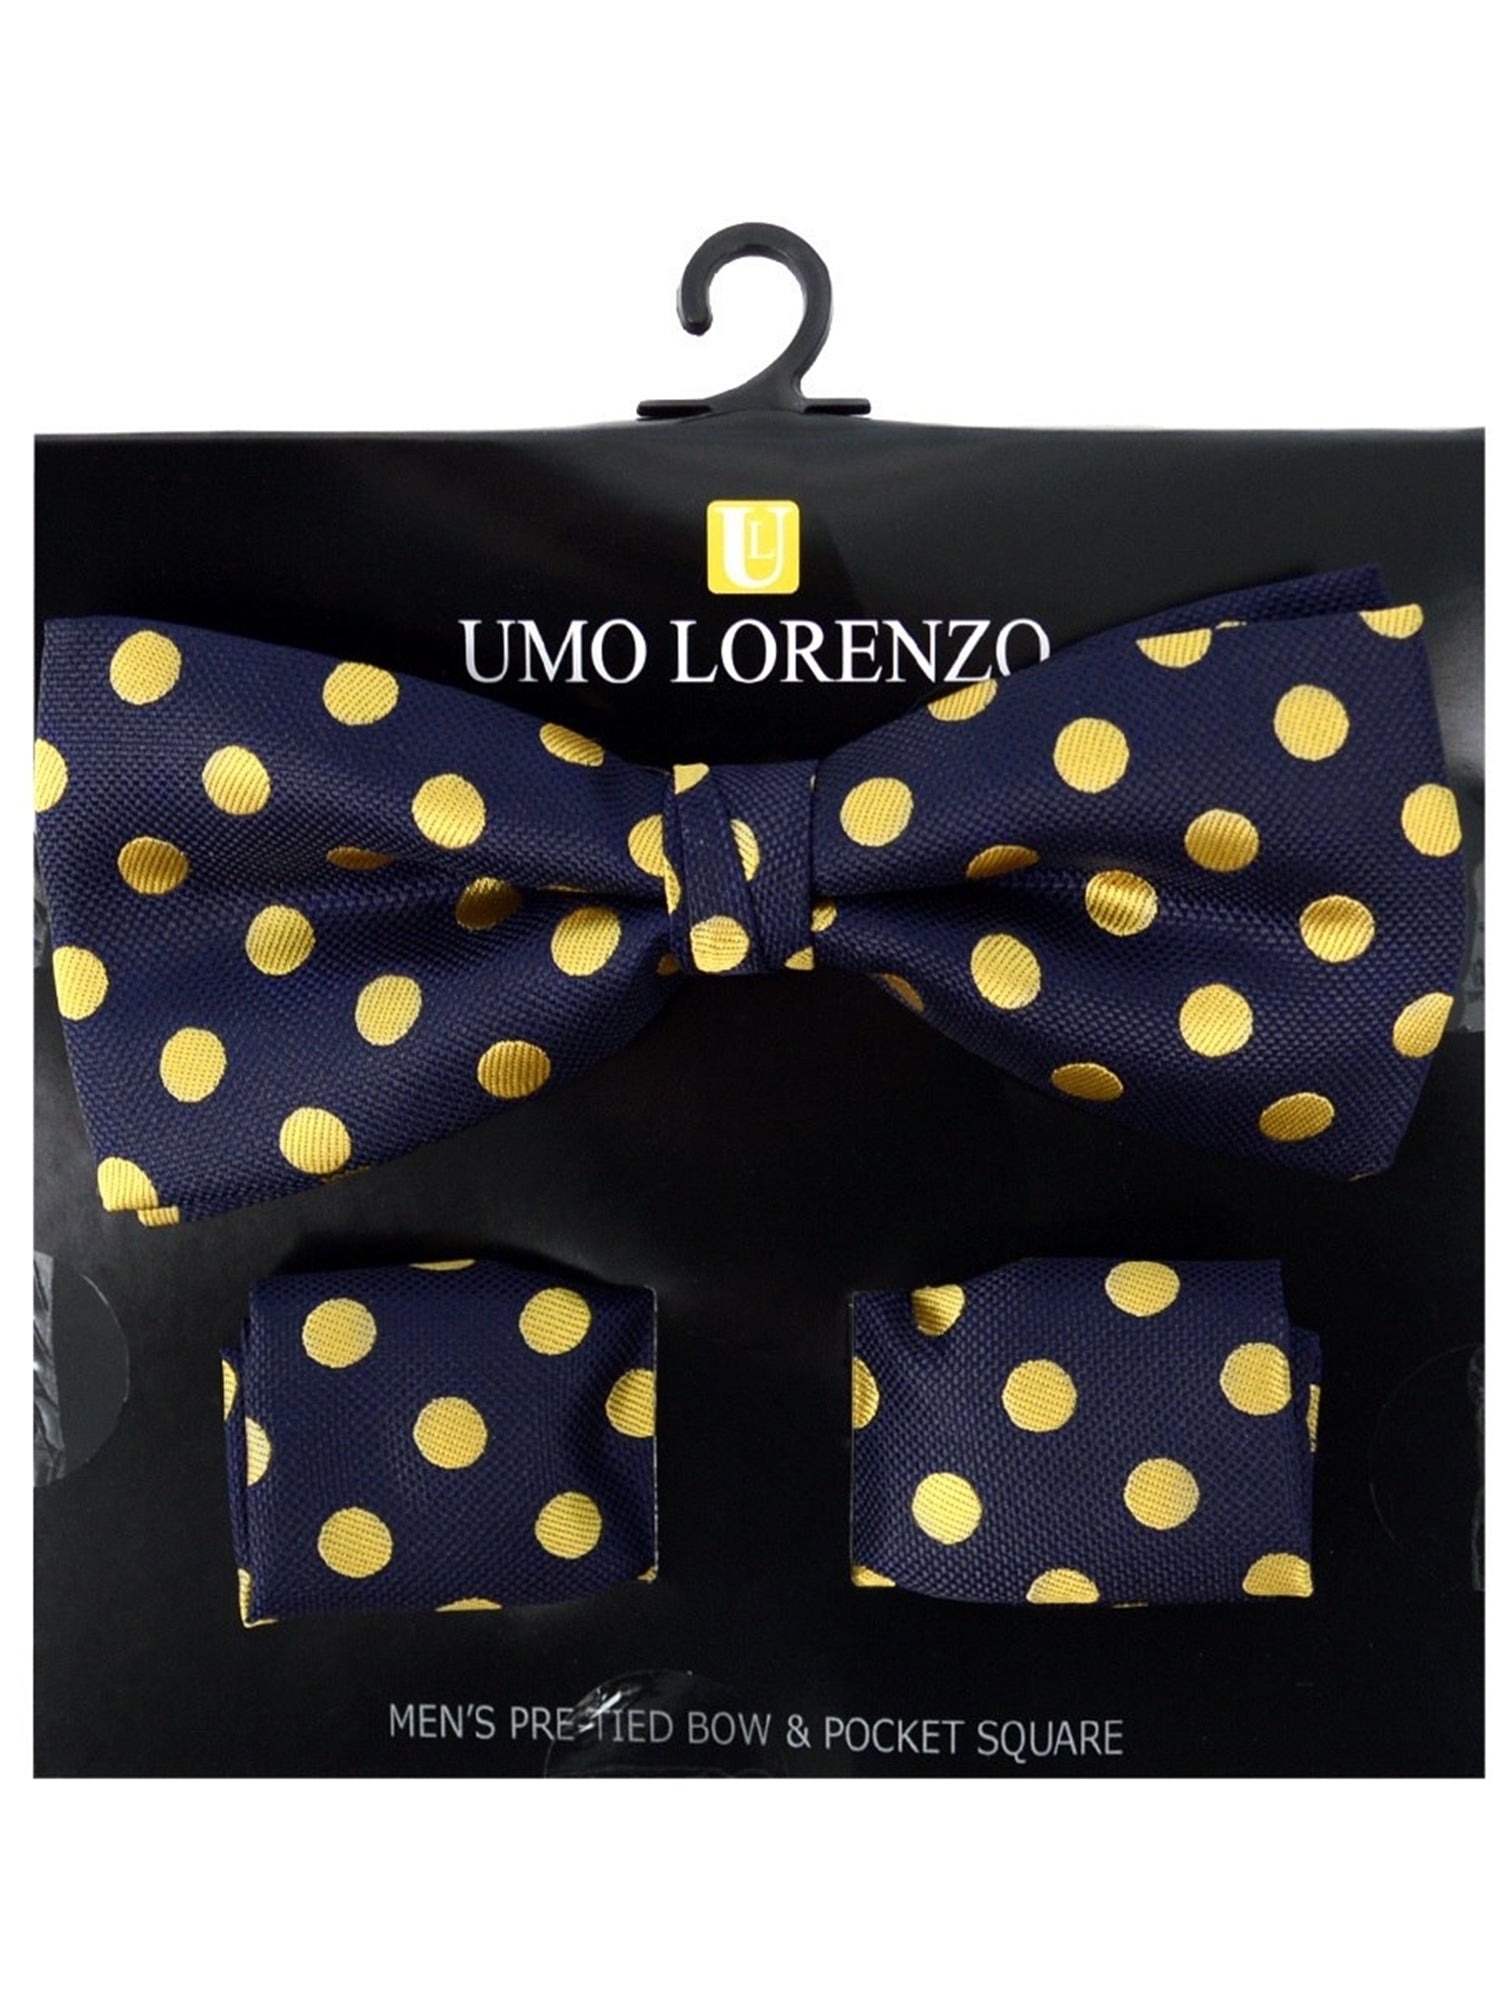 Men's Black And Gold Polka Dots Pre-tied Adjustable Length Bow Tie & Hanky Set Men's Solid Color Bow Tie TheDapperTie Navy & Gold One Size 